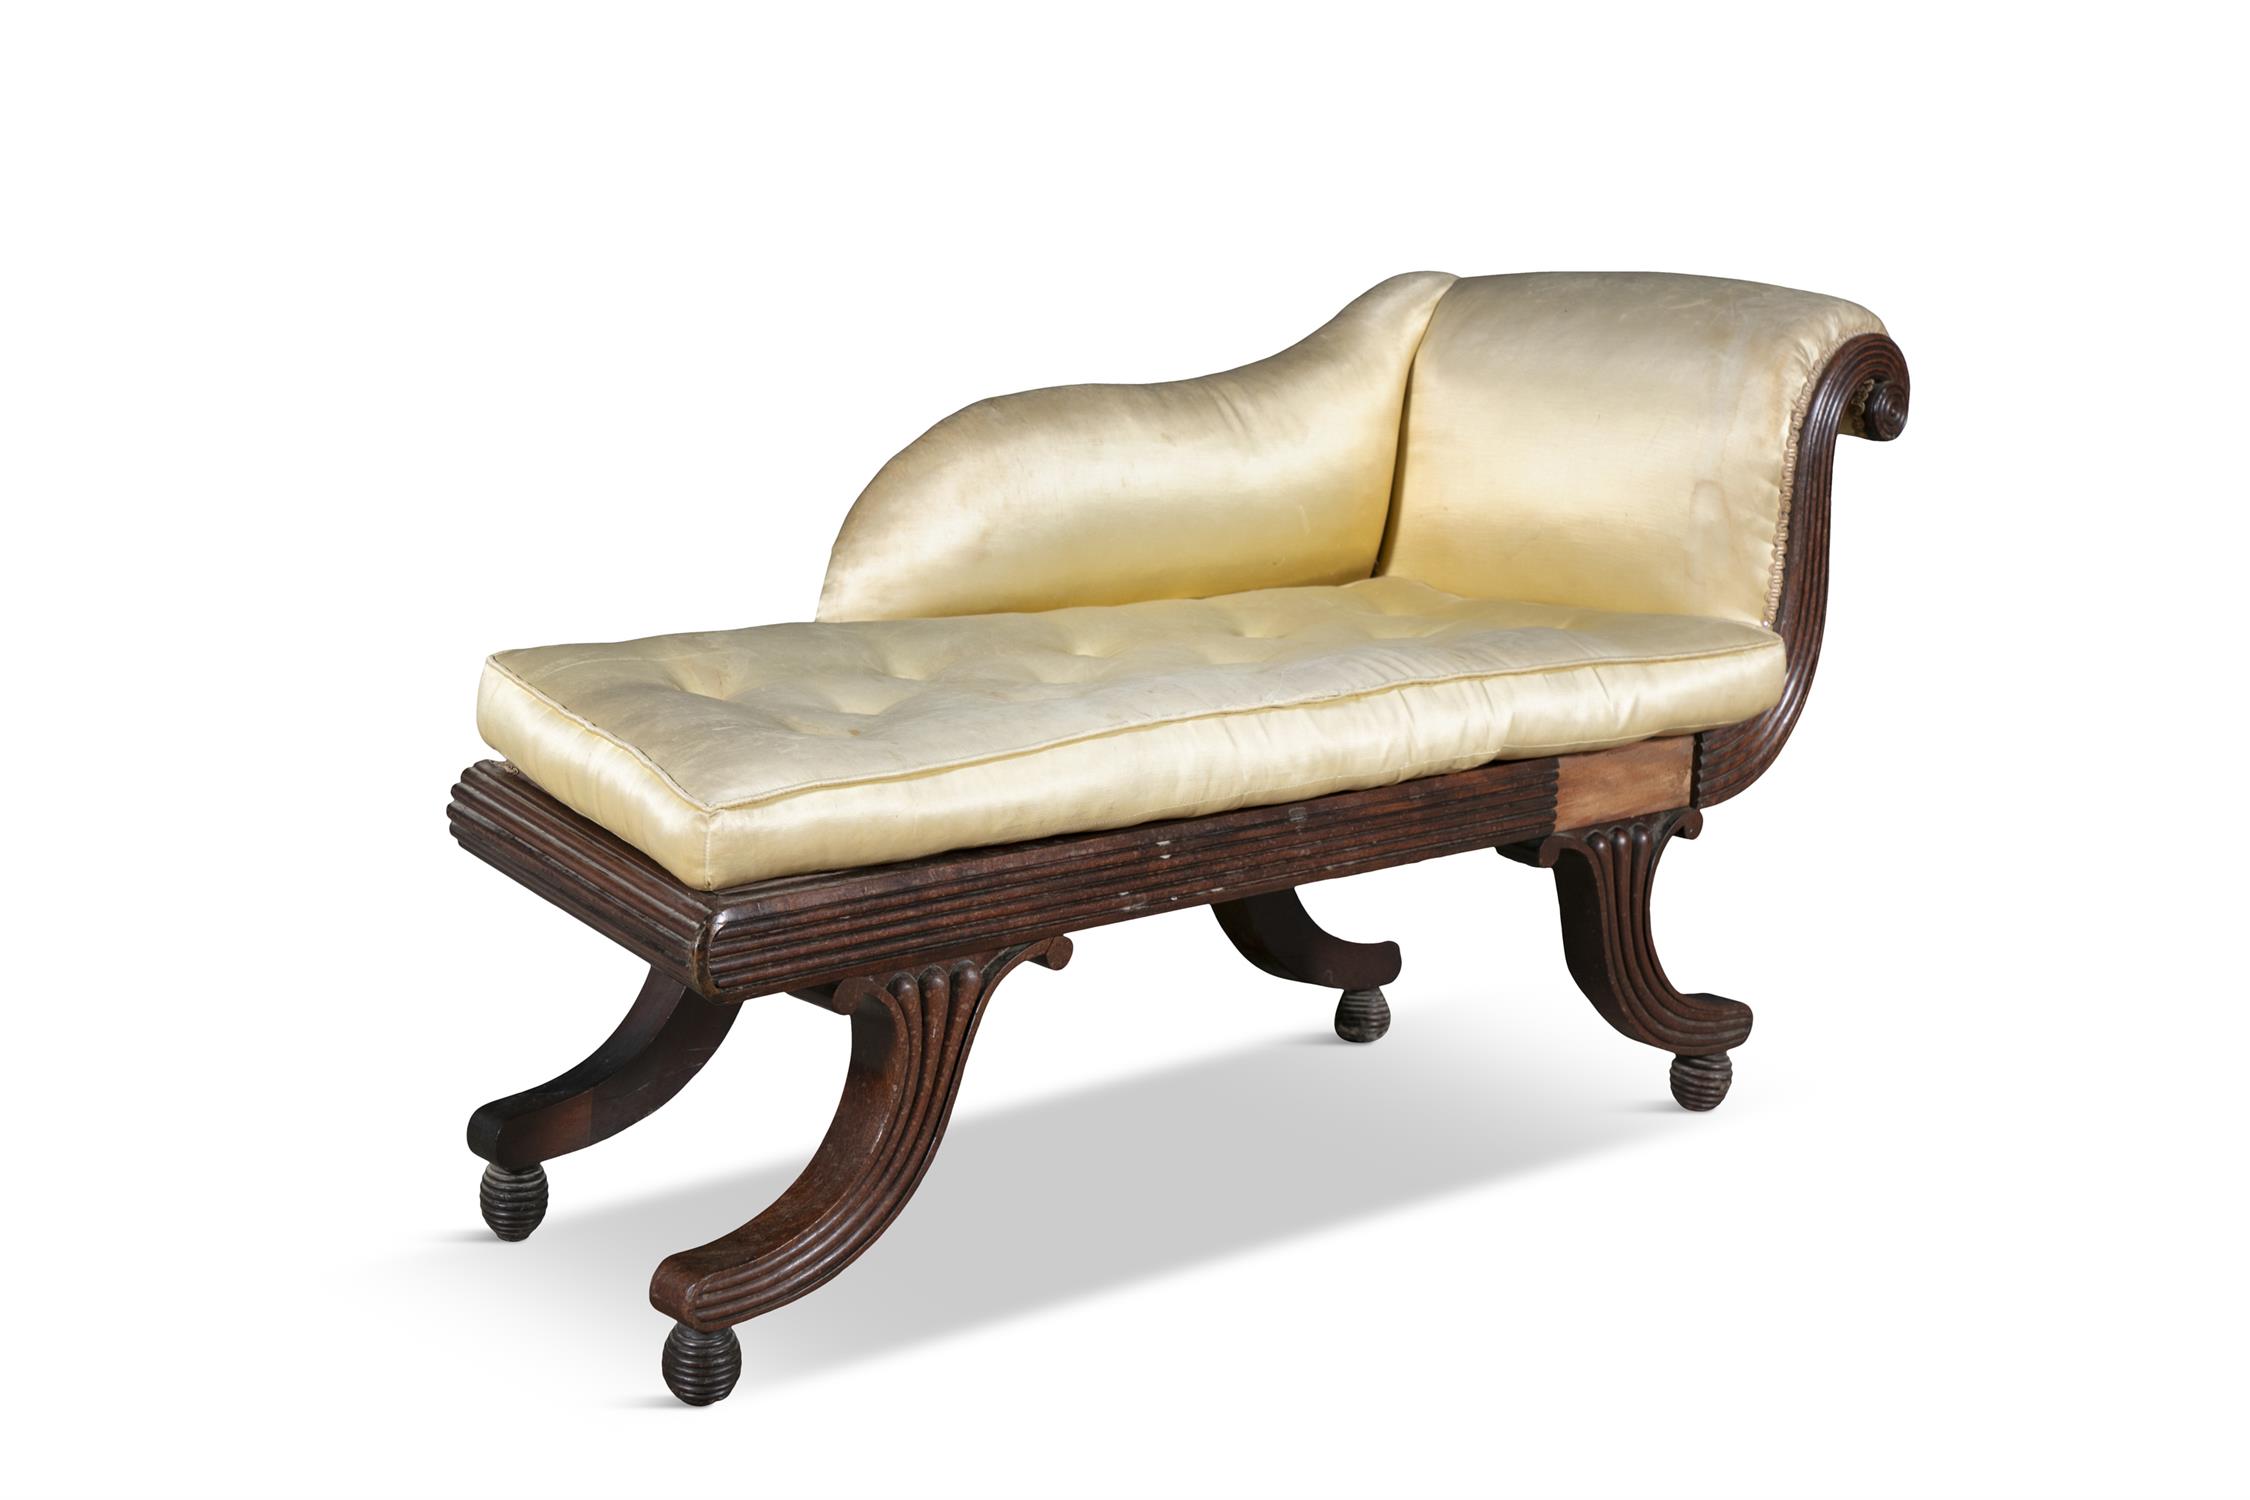 A COMPACT MAHOGANY AND SILK UPHOLSTERED CHAISE LONGUE 19TH CENTURY of classical design with - Image 2 of 3